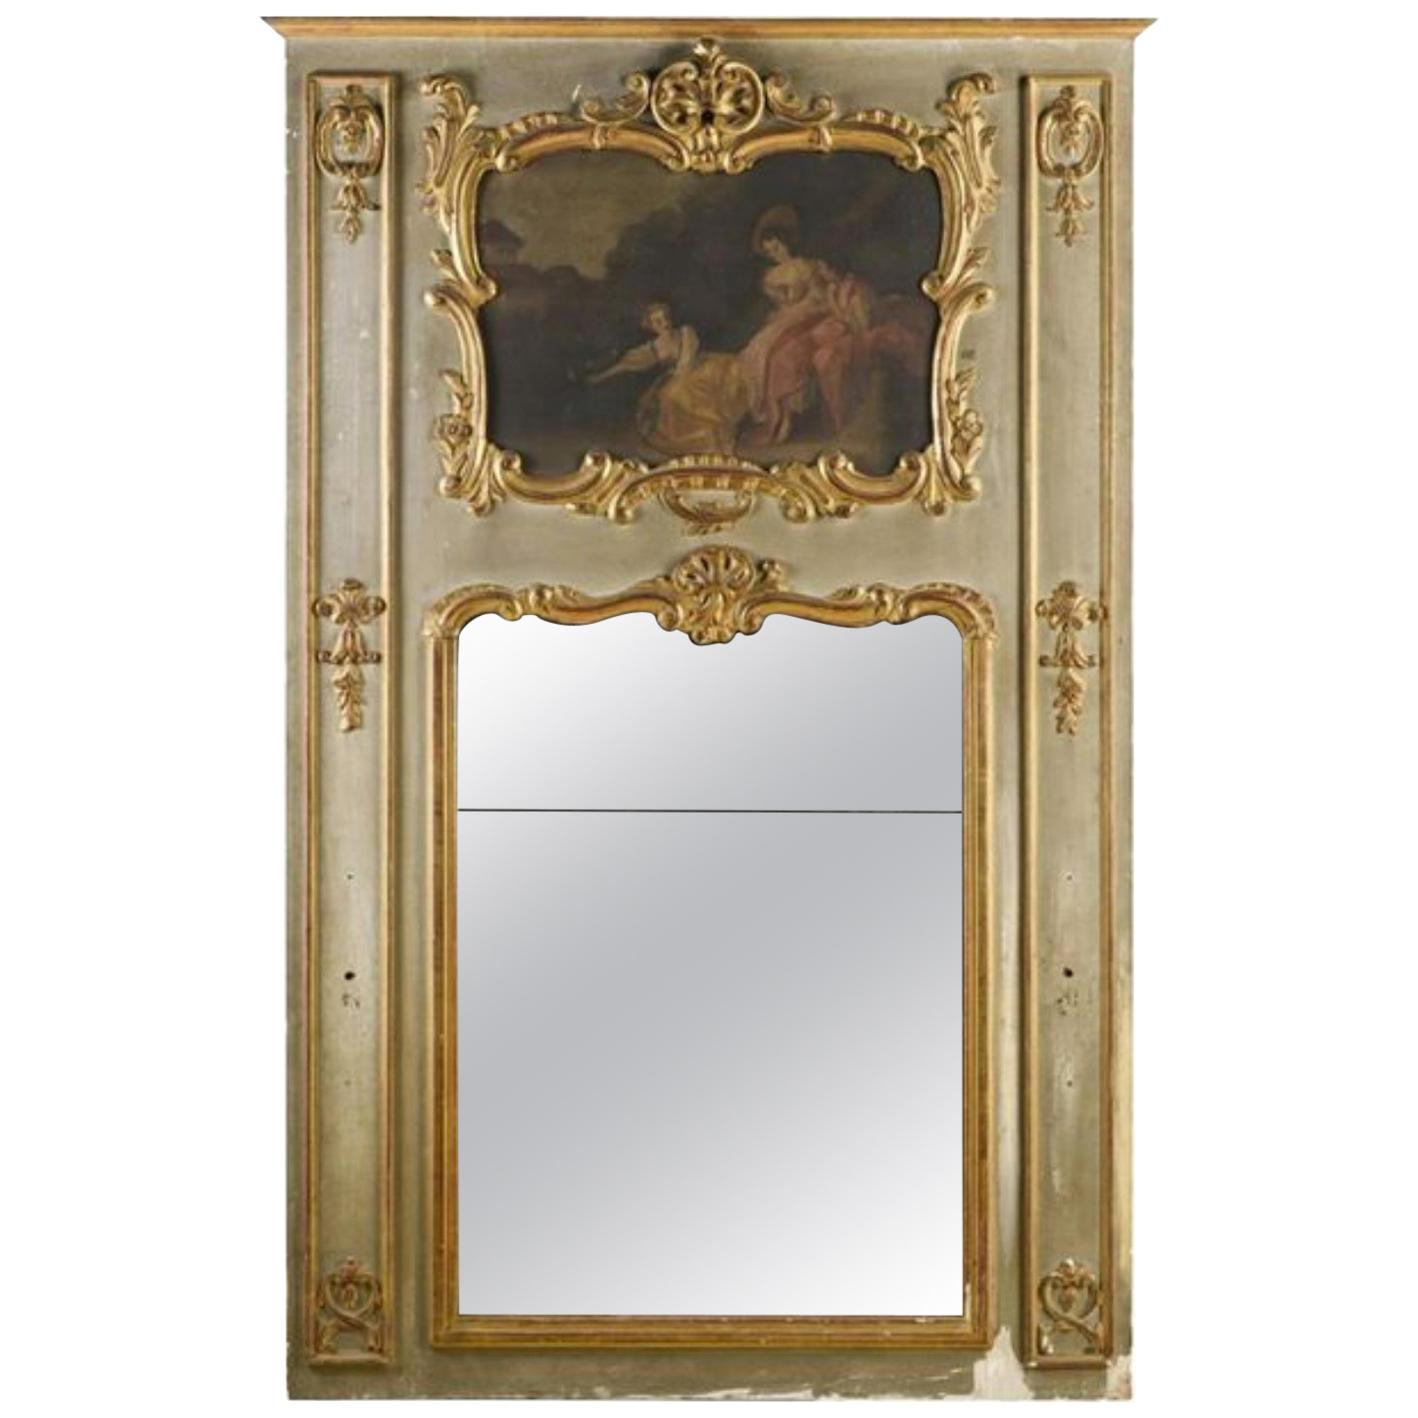 19th Century French Antique Hand Carved and Painted Fireplace Mirror, Louis XVI